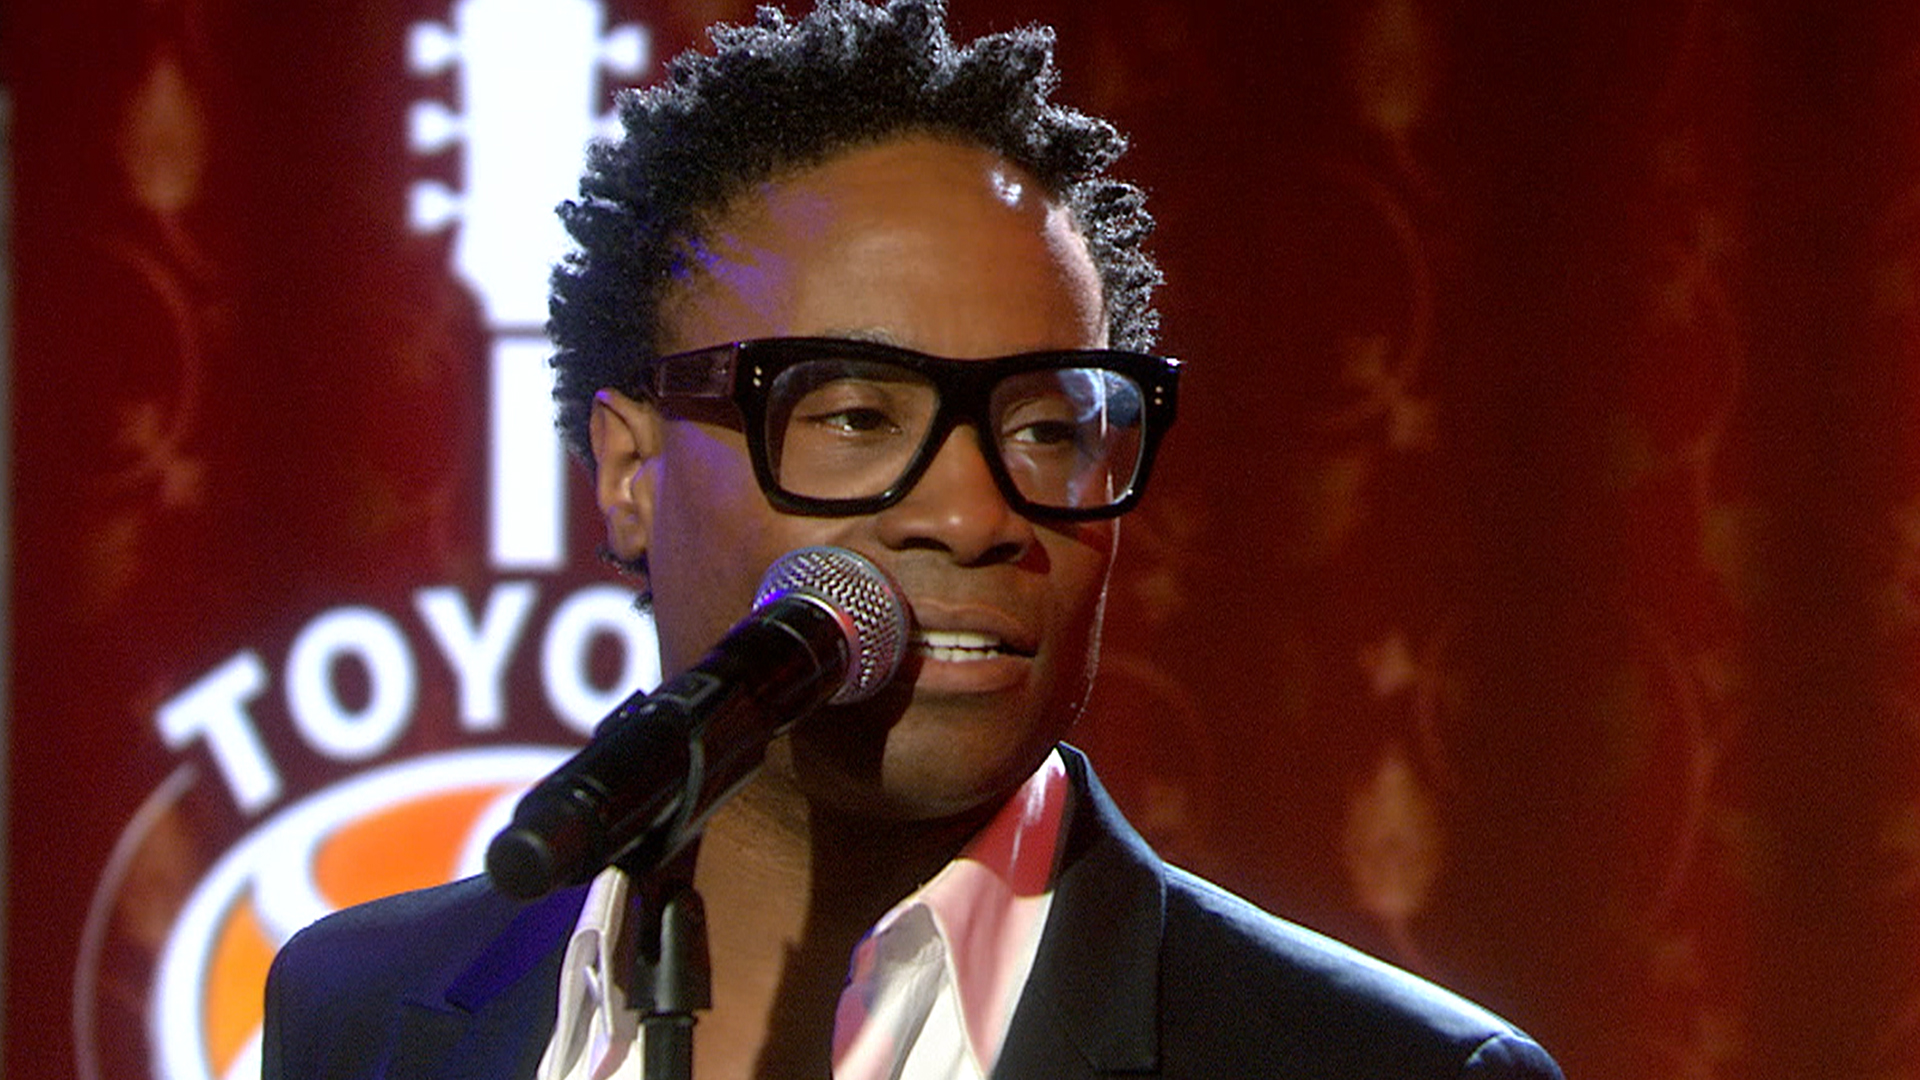 Billy Porter Sings But The World Goes Round Today